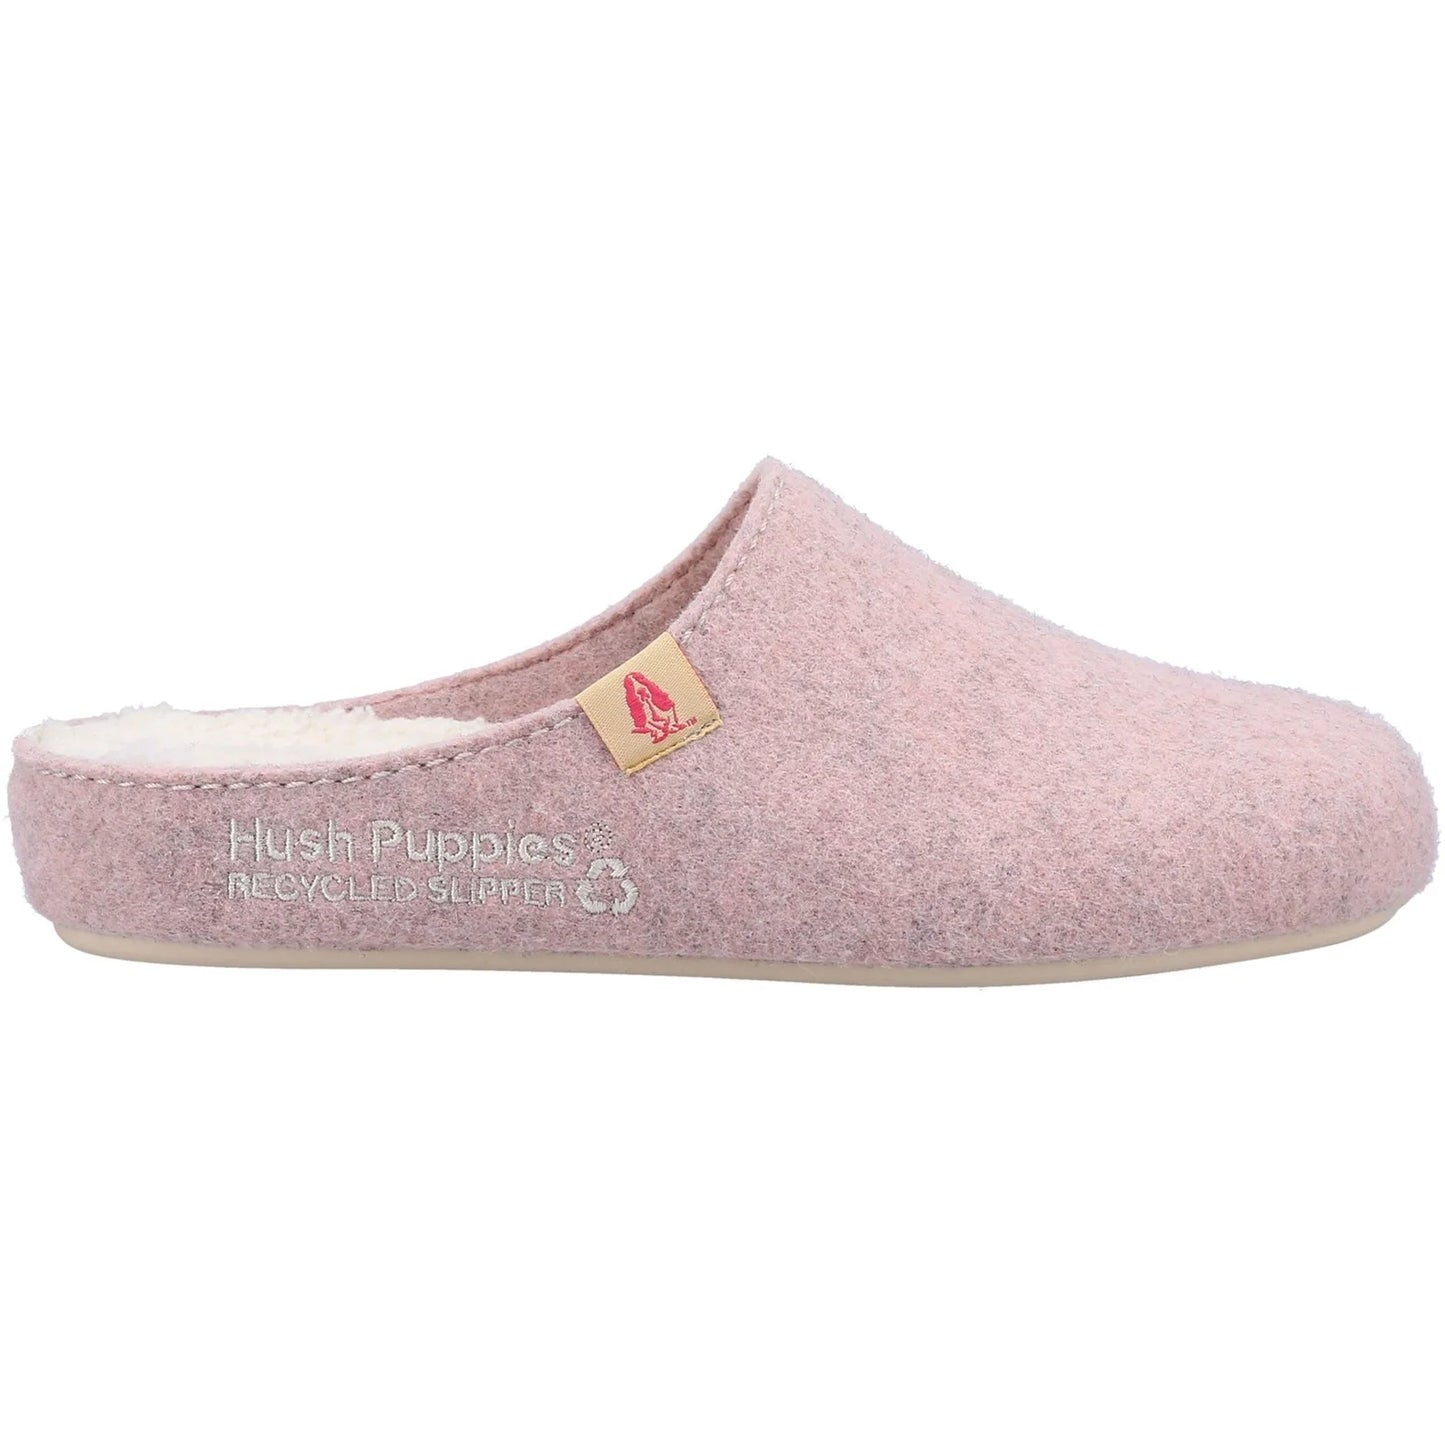 Hush Puppies Women's Recycled The Good Slipper Pink